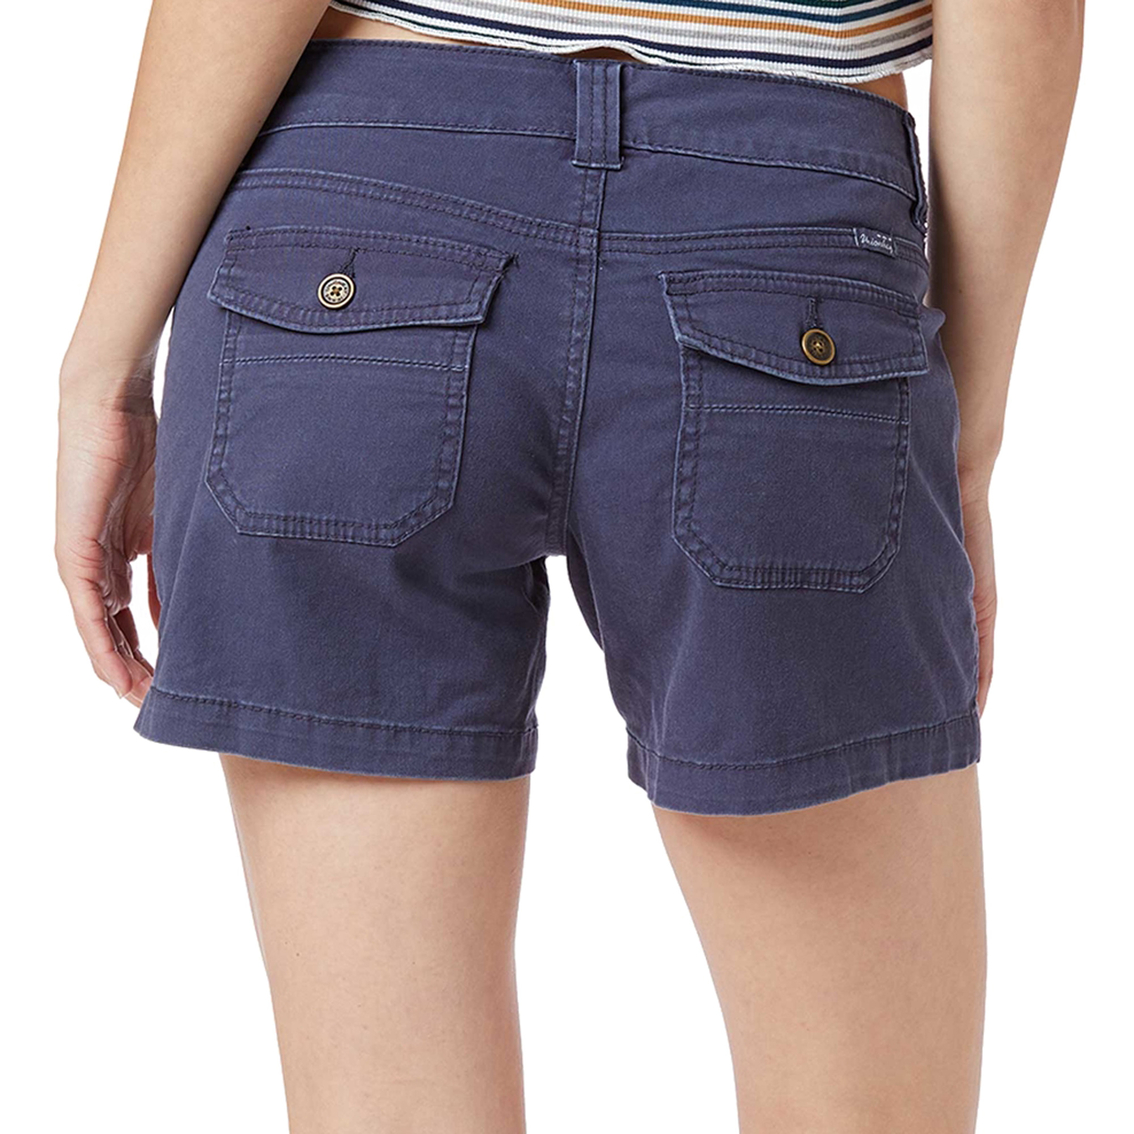 Unionbay Juniors Darcy 5 In. Solid Shorts | Shorts | Clothing ...